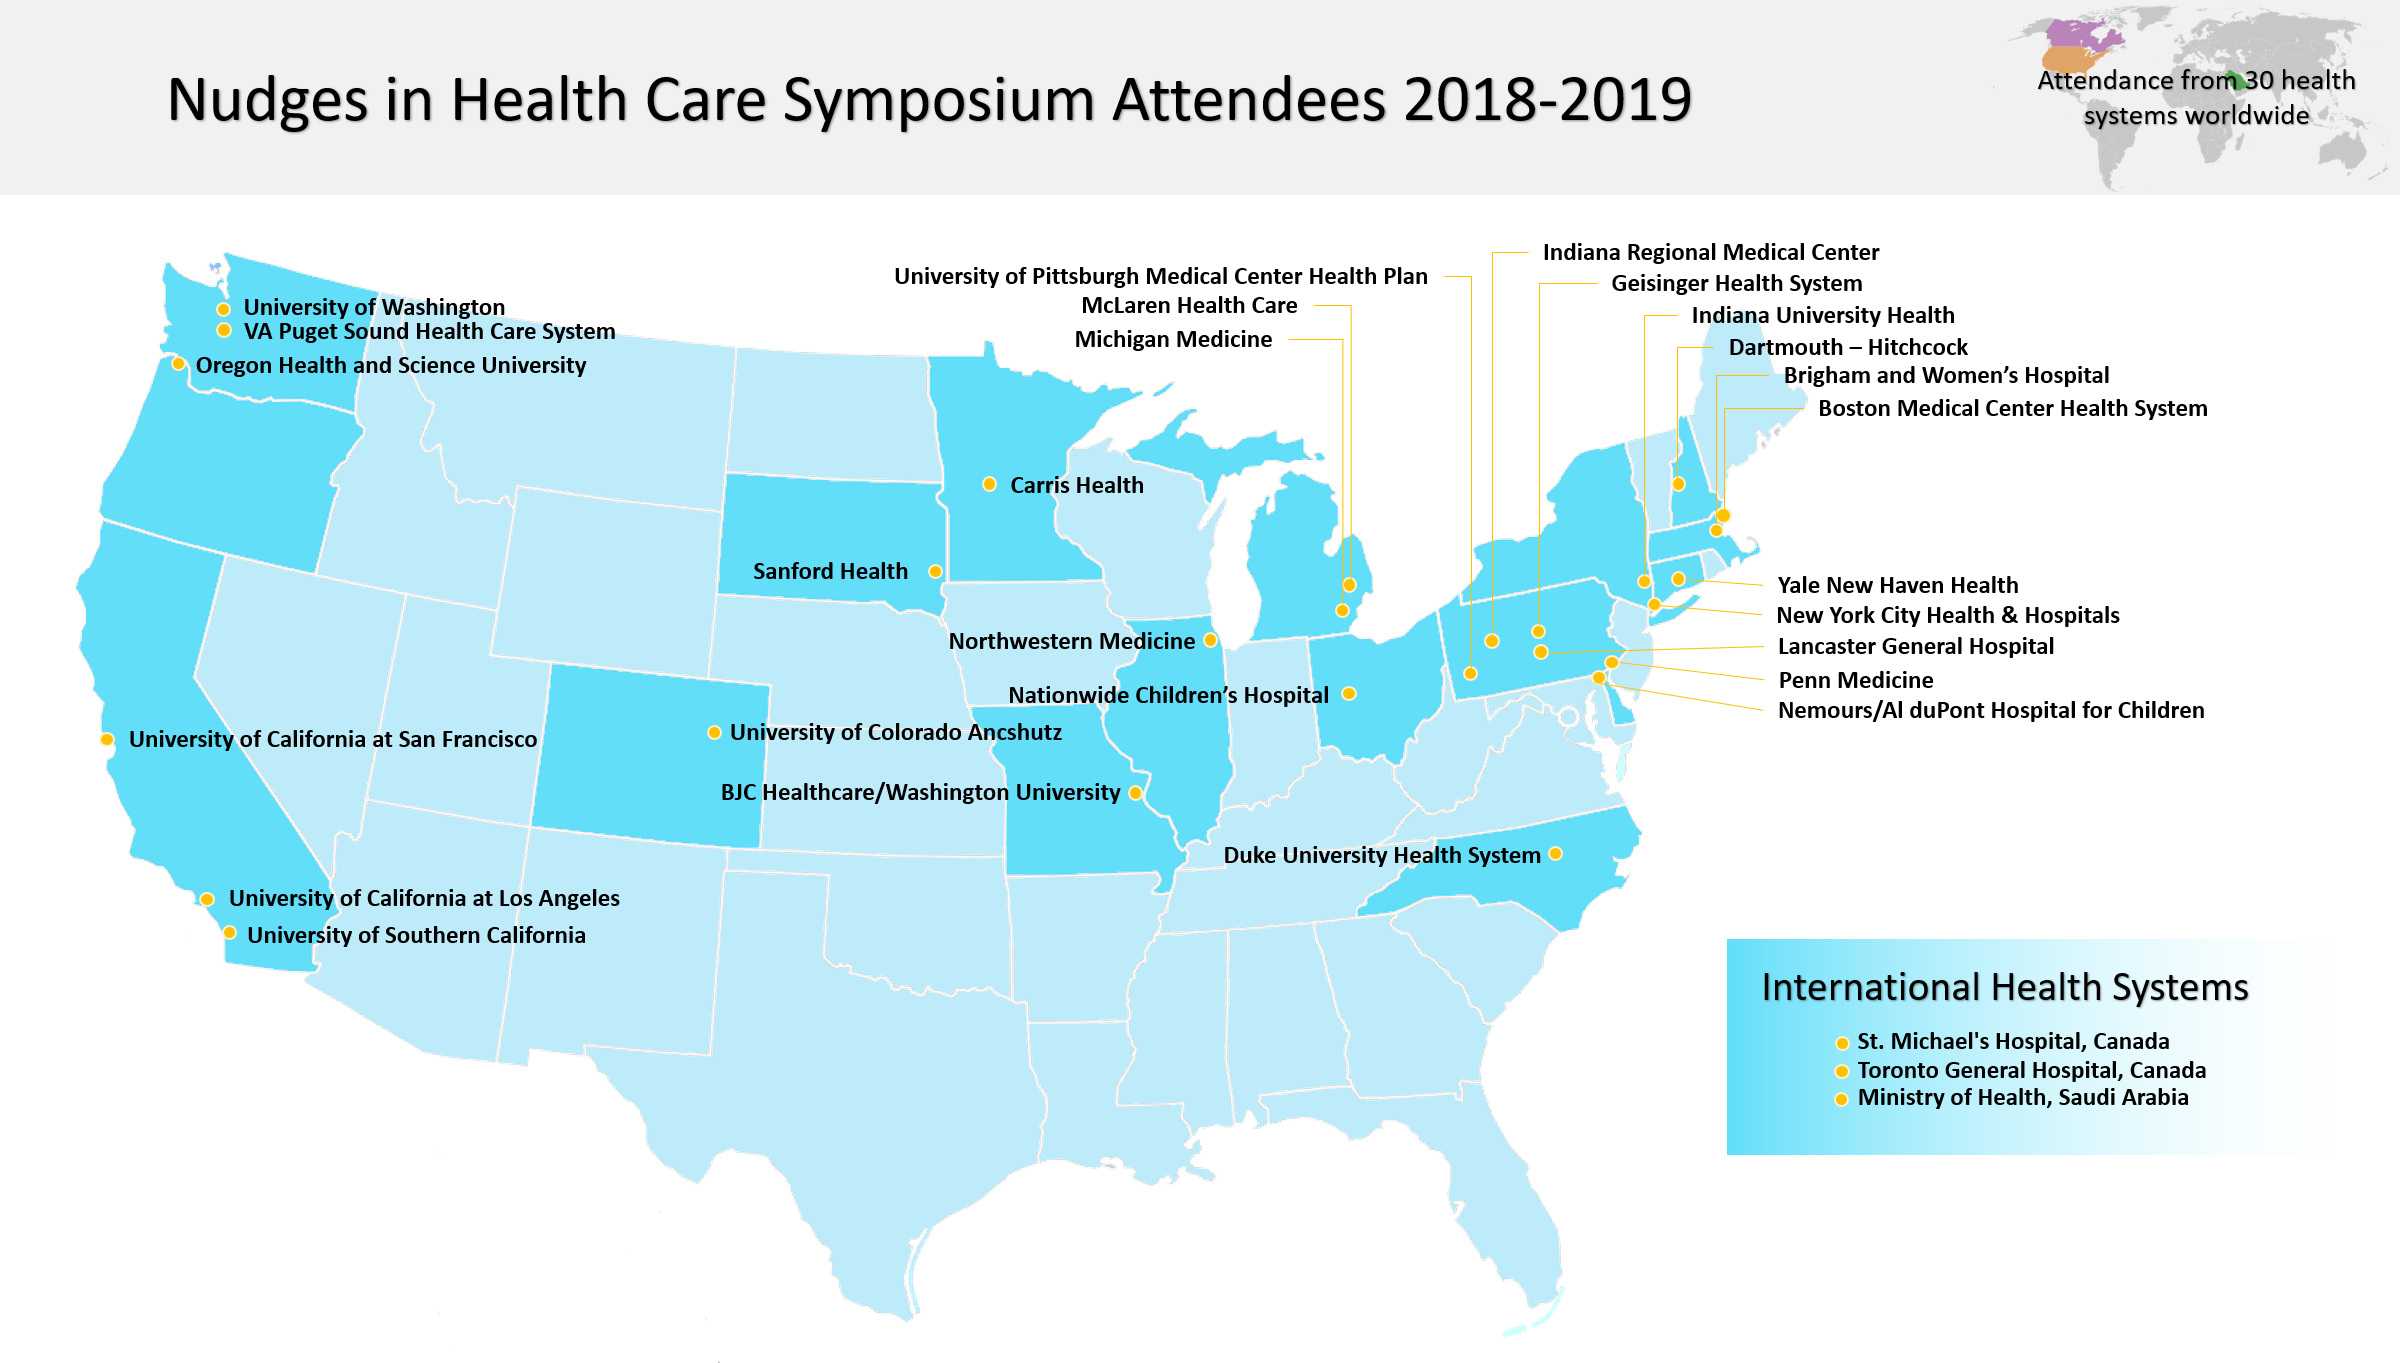 nudges in health care symposium attendees map 2018 2019